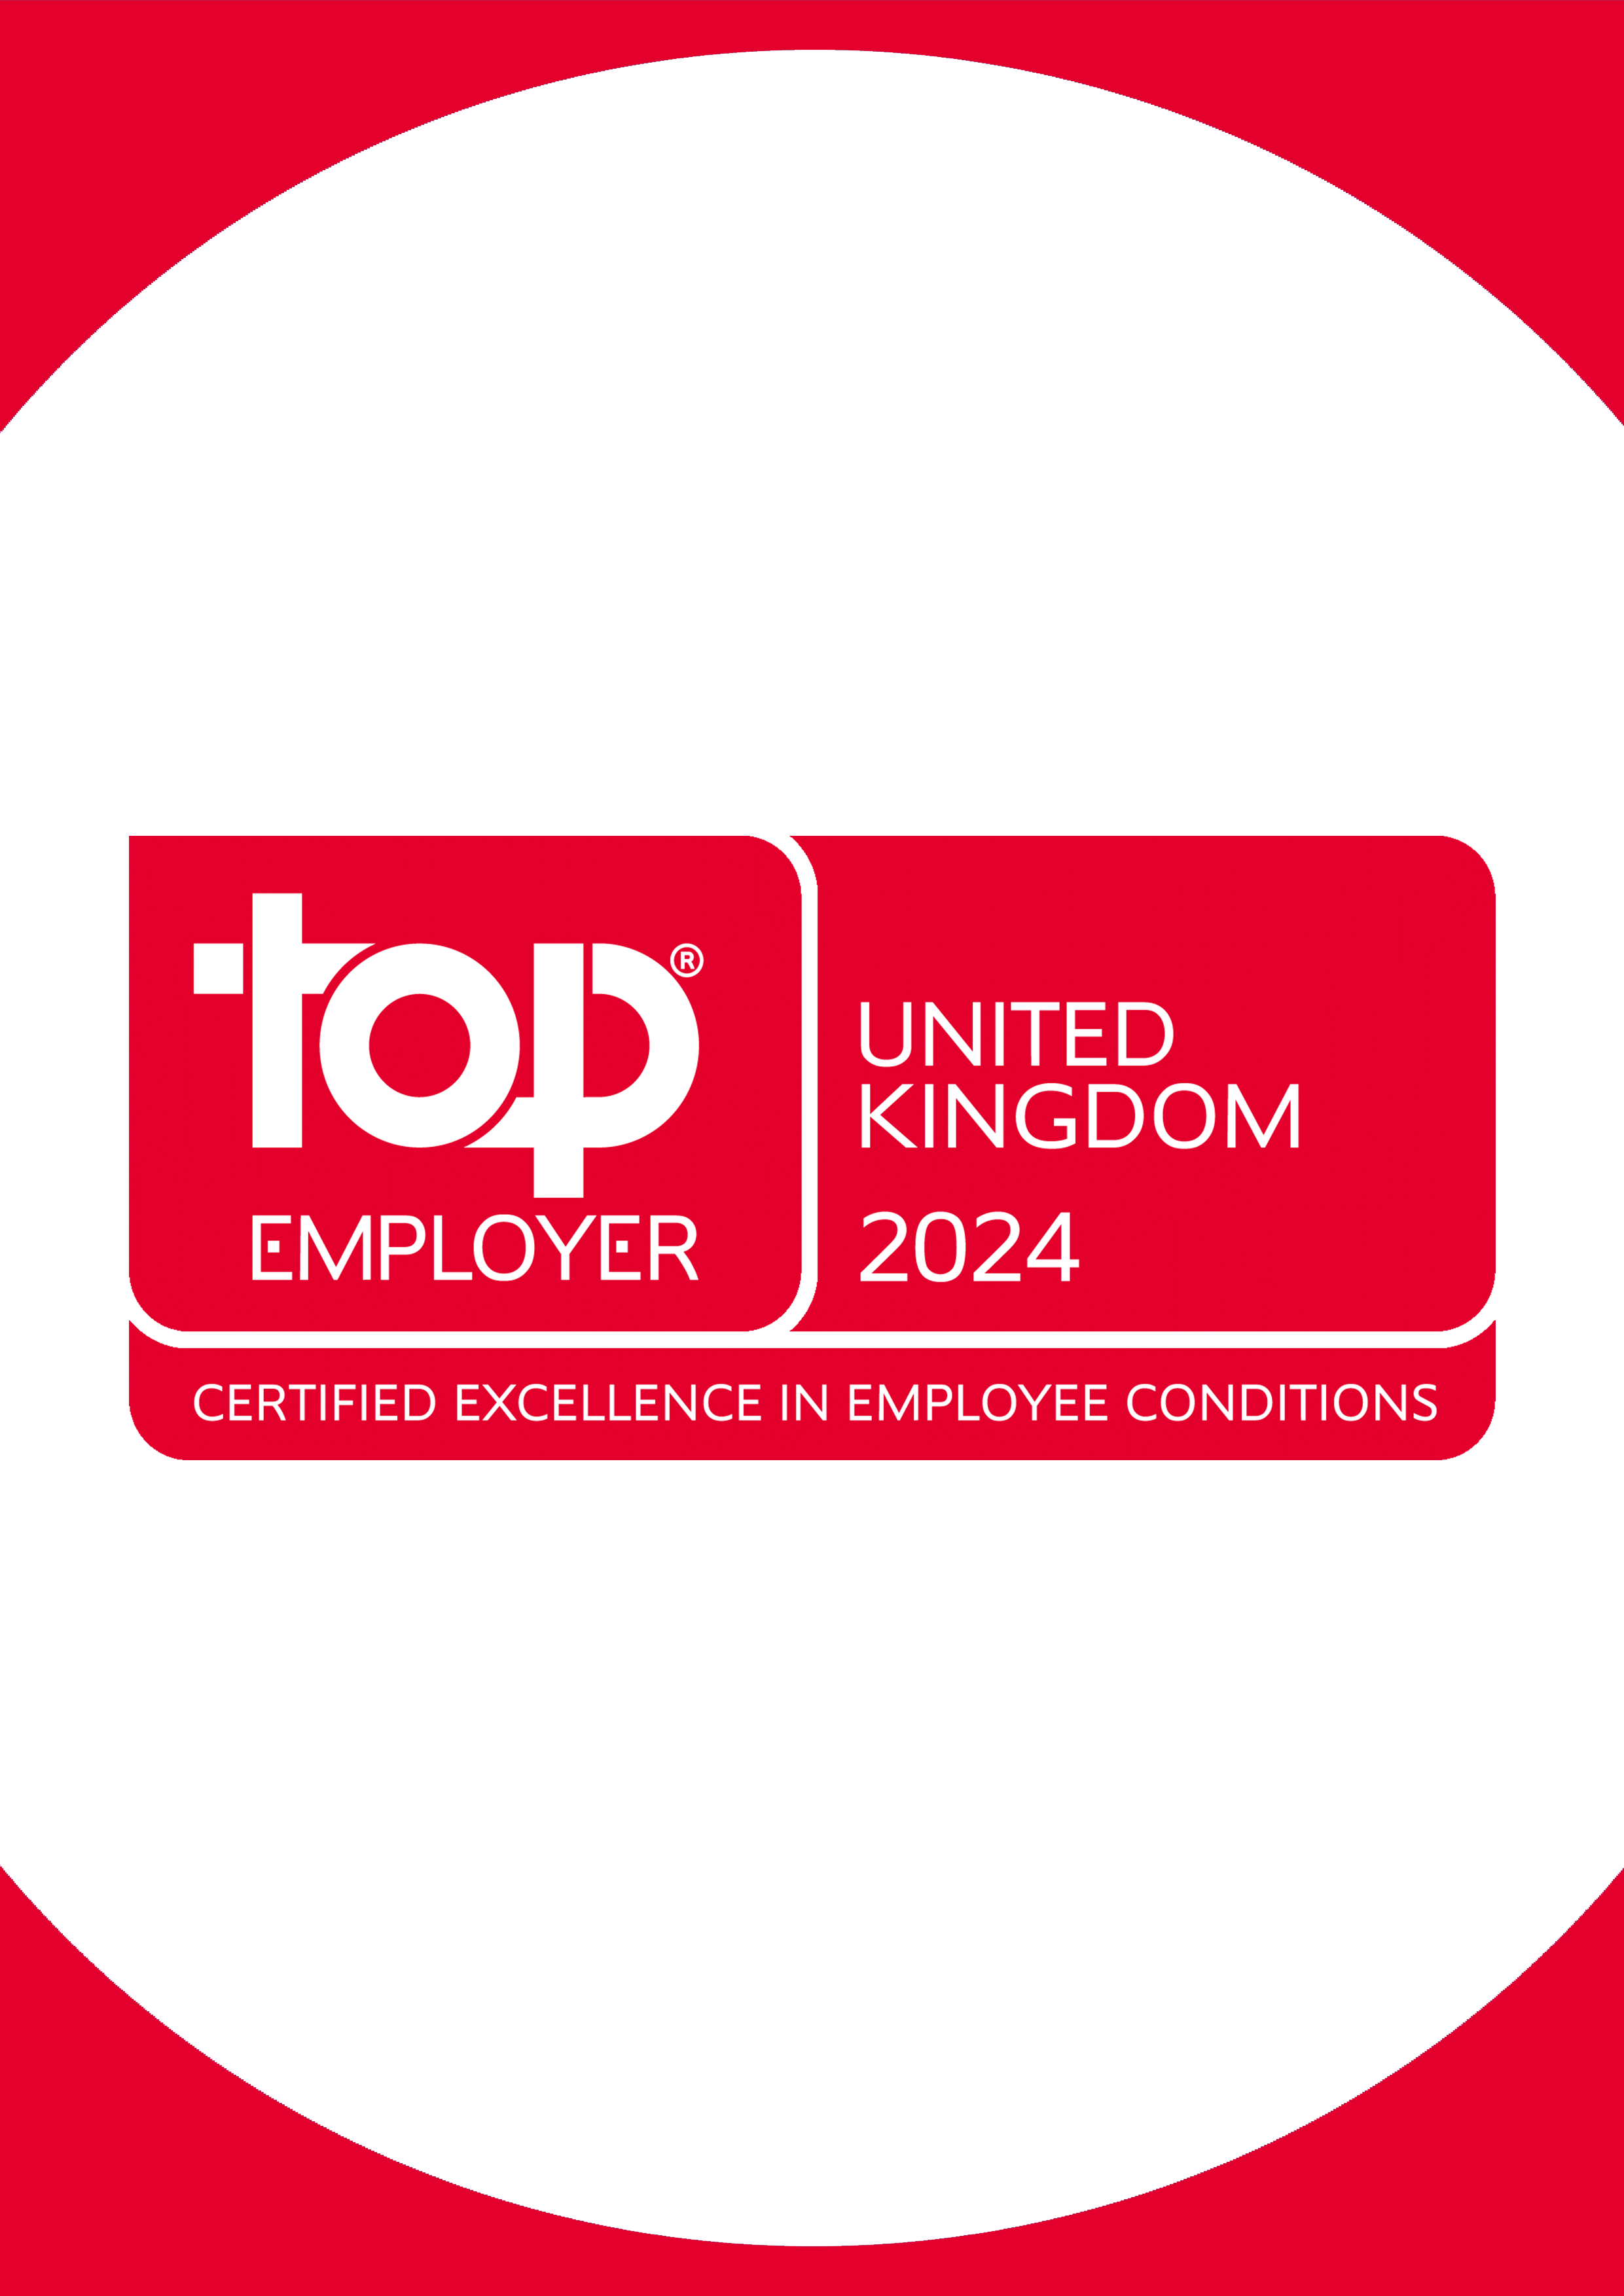 Recognised as a Top Employer